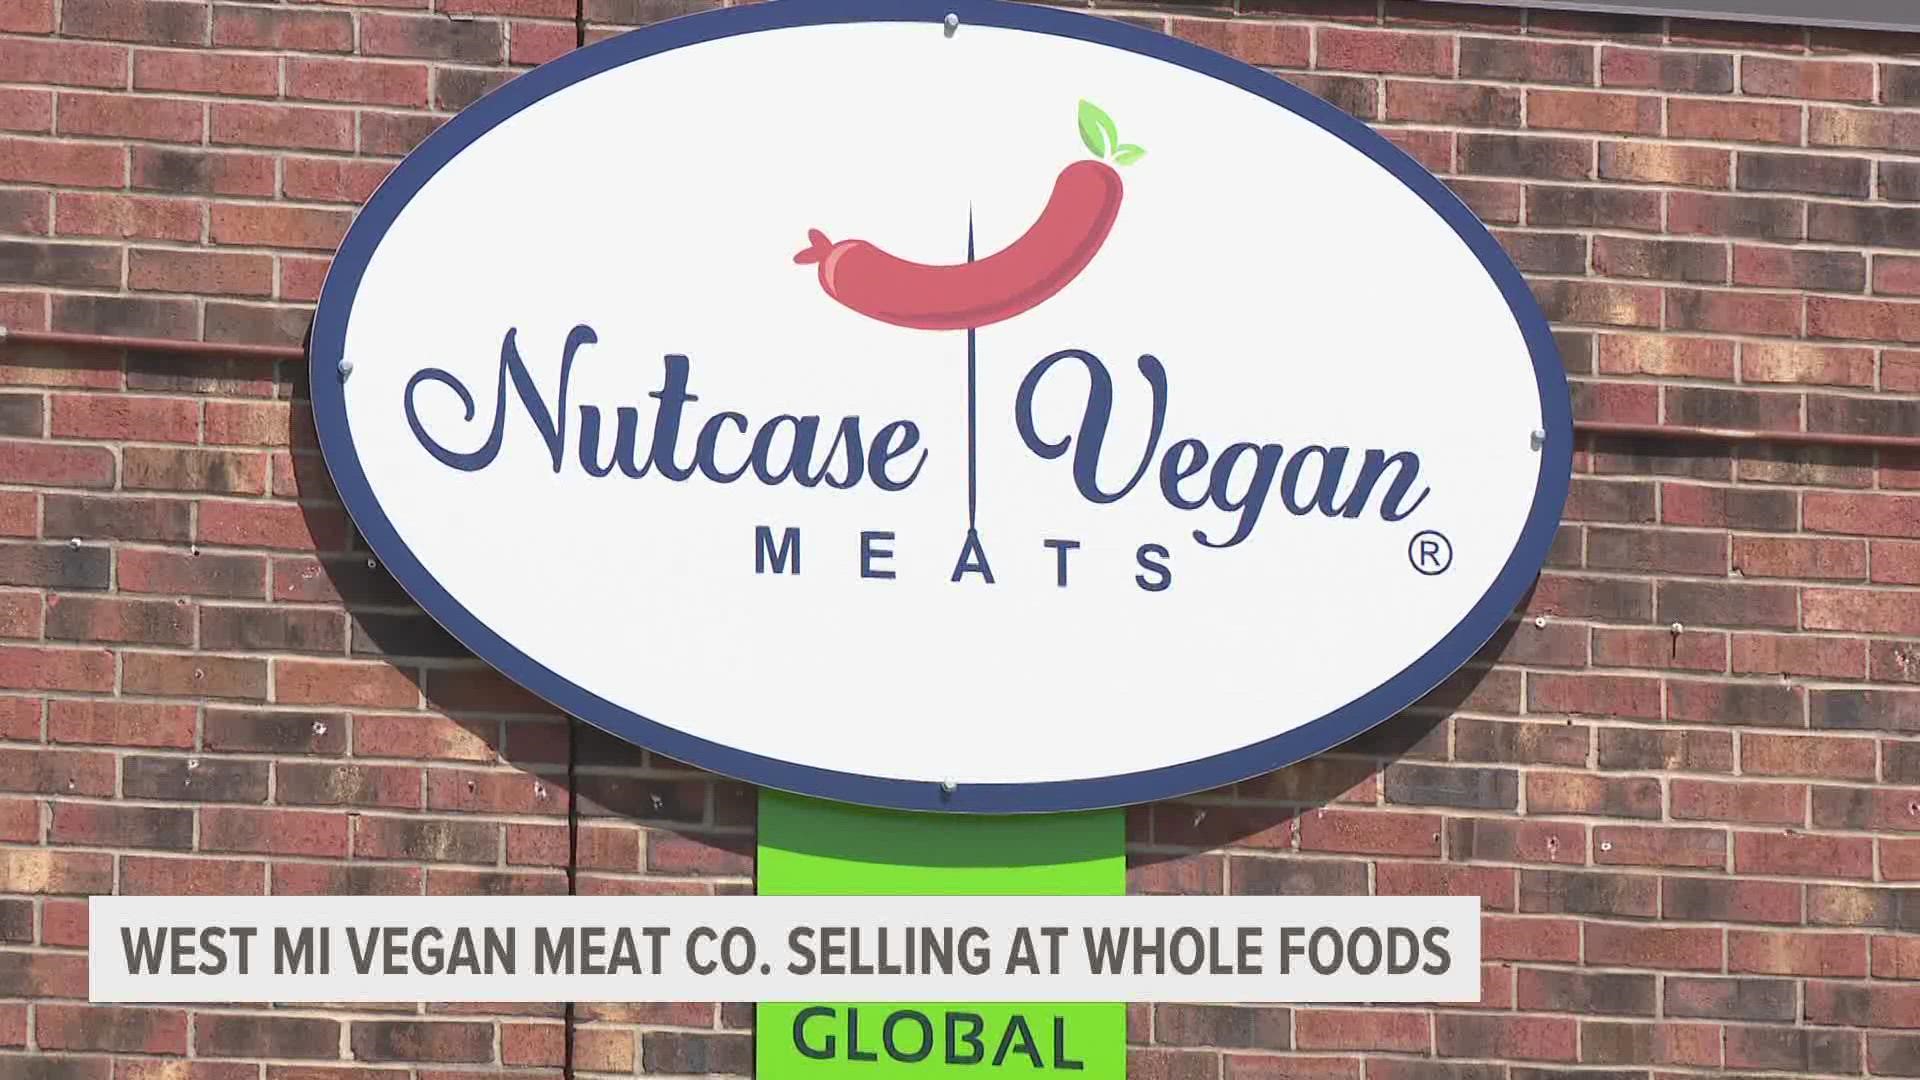 Nutcase Vegan Meats produces plant based burgers, sausage, meat loaf, jerky and more. They will be found in the freezer section of the new Kentwood Whole Foods.